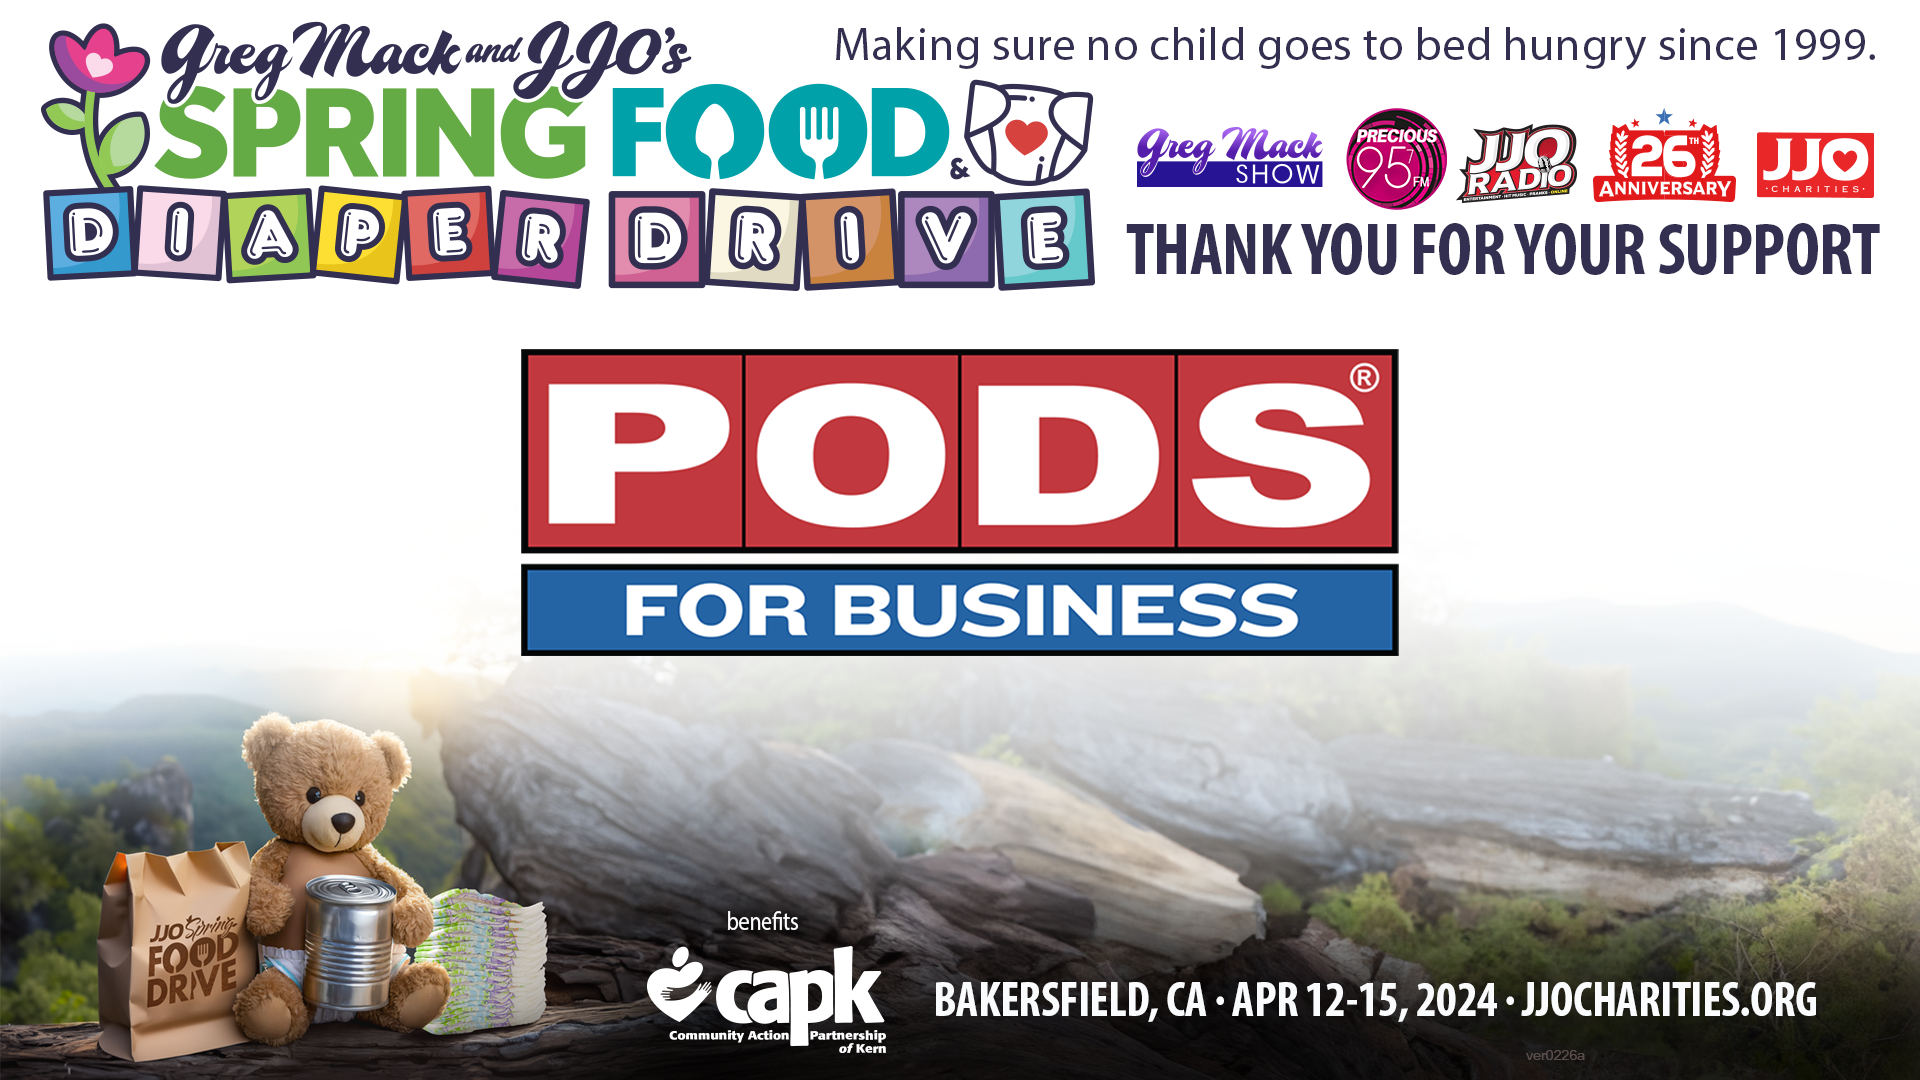 Greg Mack & JJO's Spring Food & Diaper Drive Thank You PODS For Business